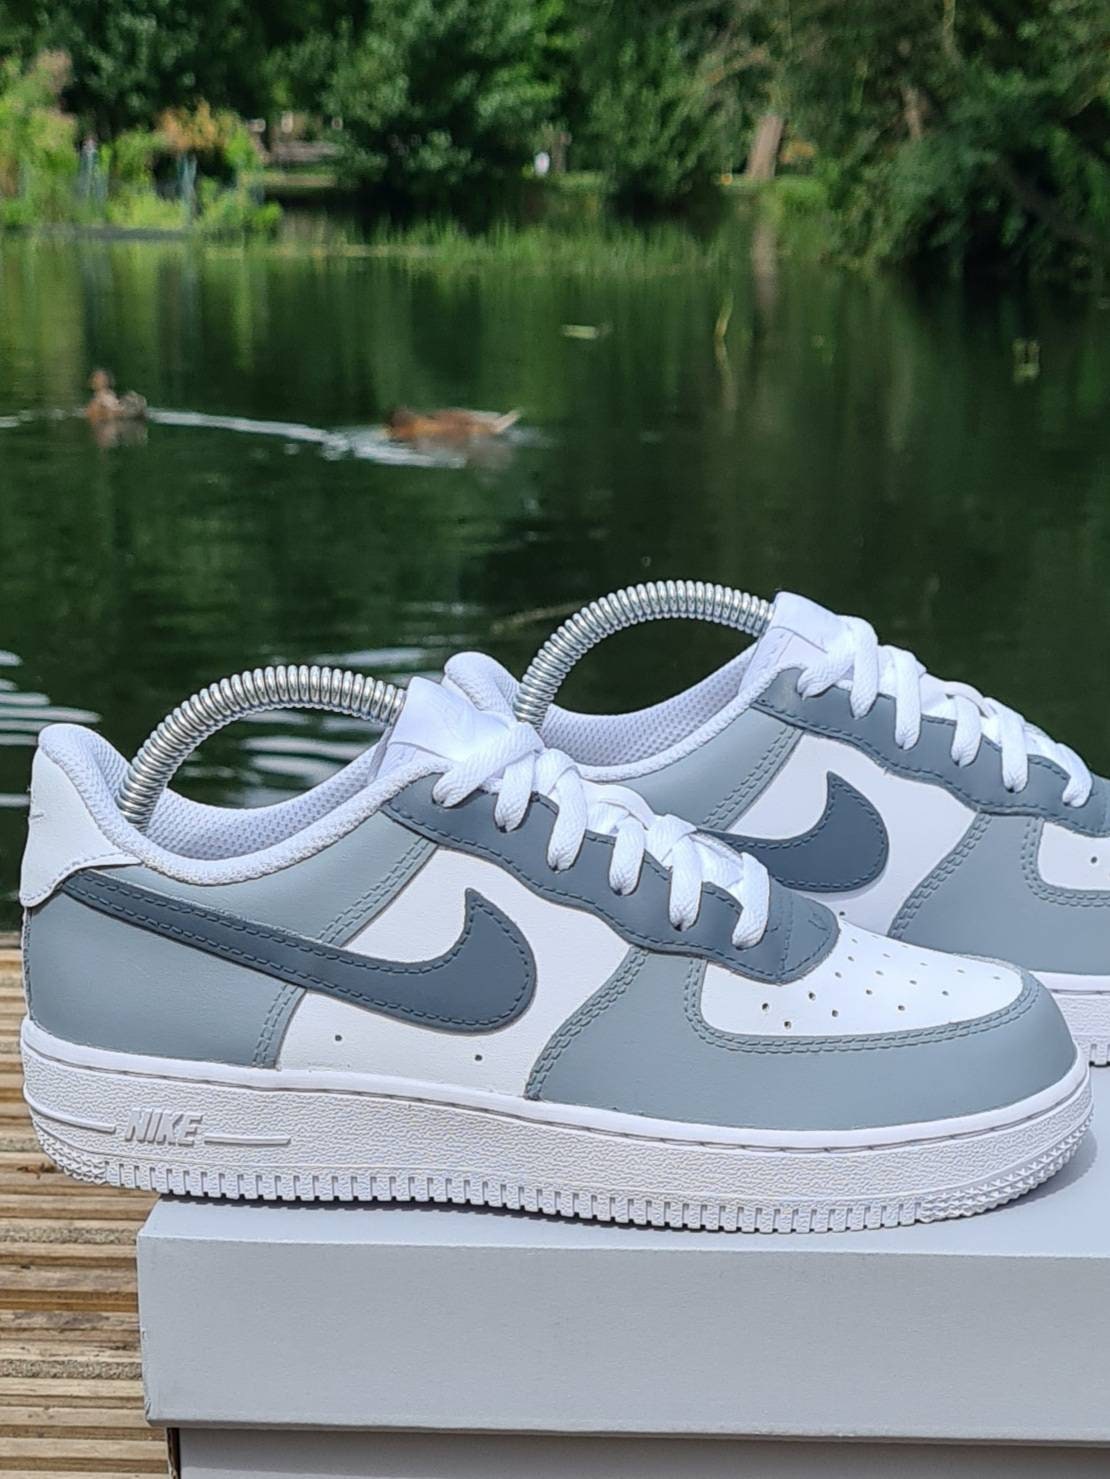 Custom Grey Air Force 1 Trainers, Af1 Nike 2 Toned Grey, Slate Grey / Wolf Grey Sneakers (All Sizes, Mens, Women's Junior Kids and Infants)